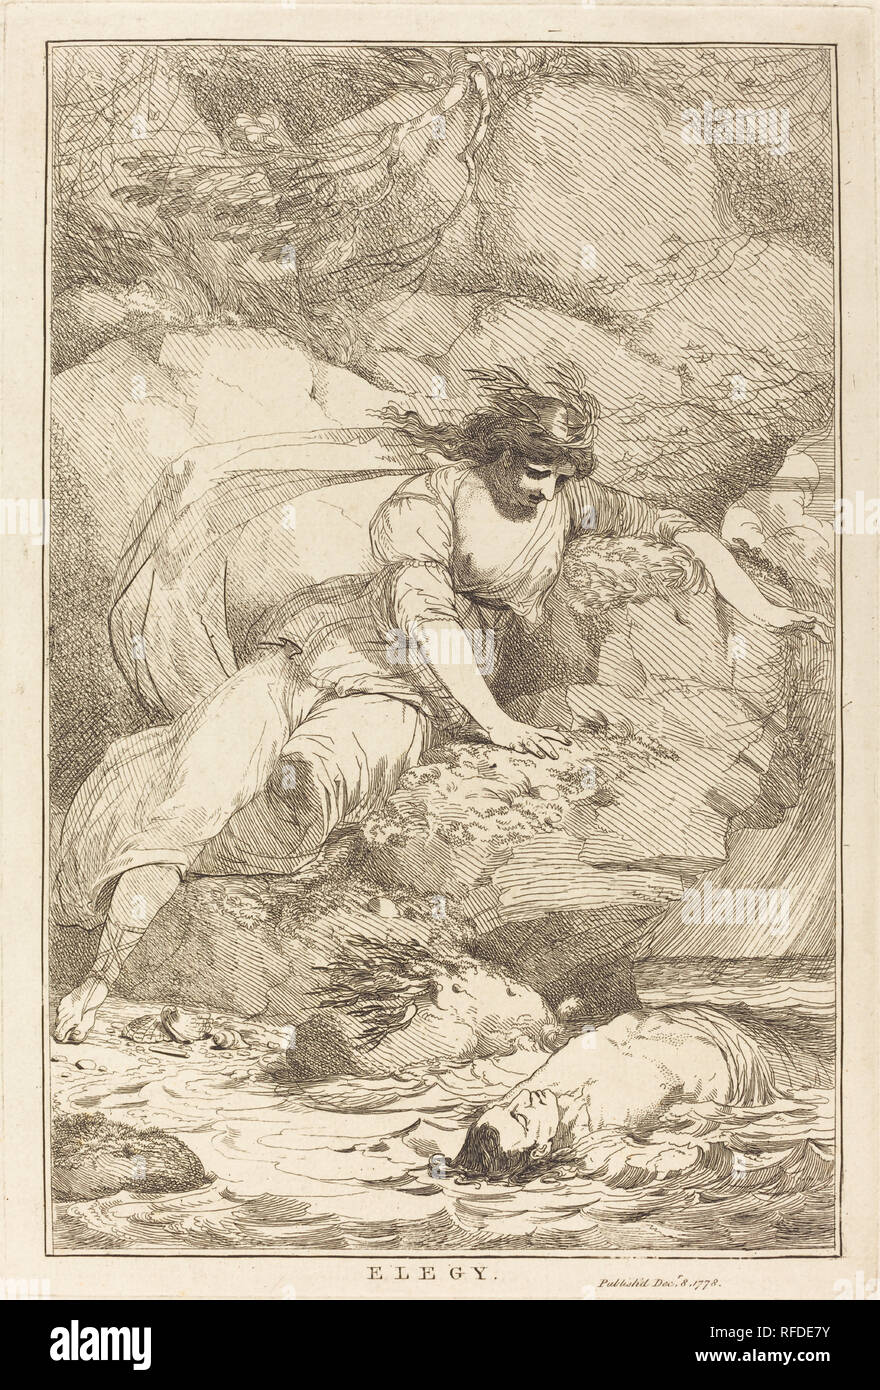 Elegy. Dated: 1778. Dimensions: plate: 29.9 × 20.1 cm (11 3/4 × 7 15/16 in.)  sheet: 42.1 × 29.5 cm (16 9/16 × 11 5/8 in.). Medium: etching. Museum: National Gallery of Art, Washington DC. Author: John Hamilton Mortimer. Stock Photo